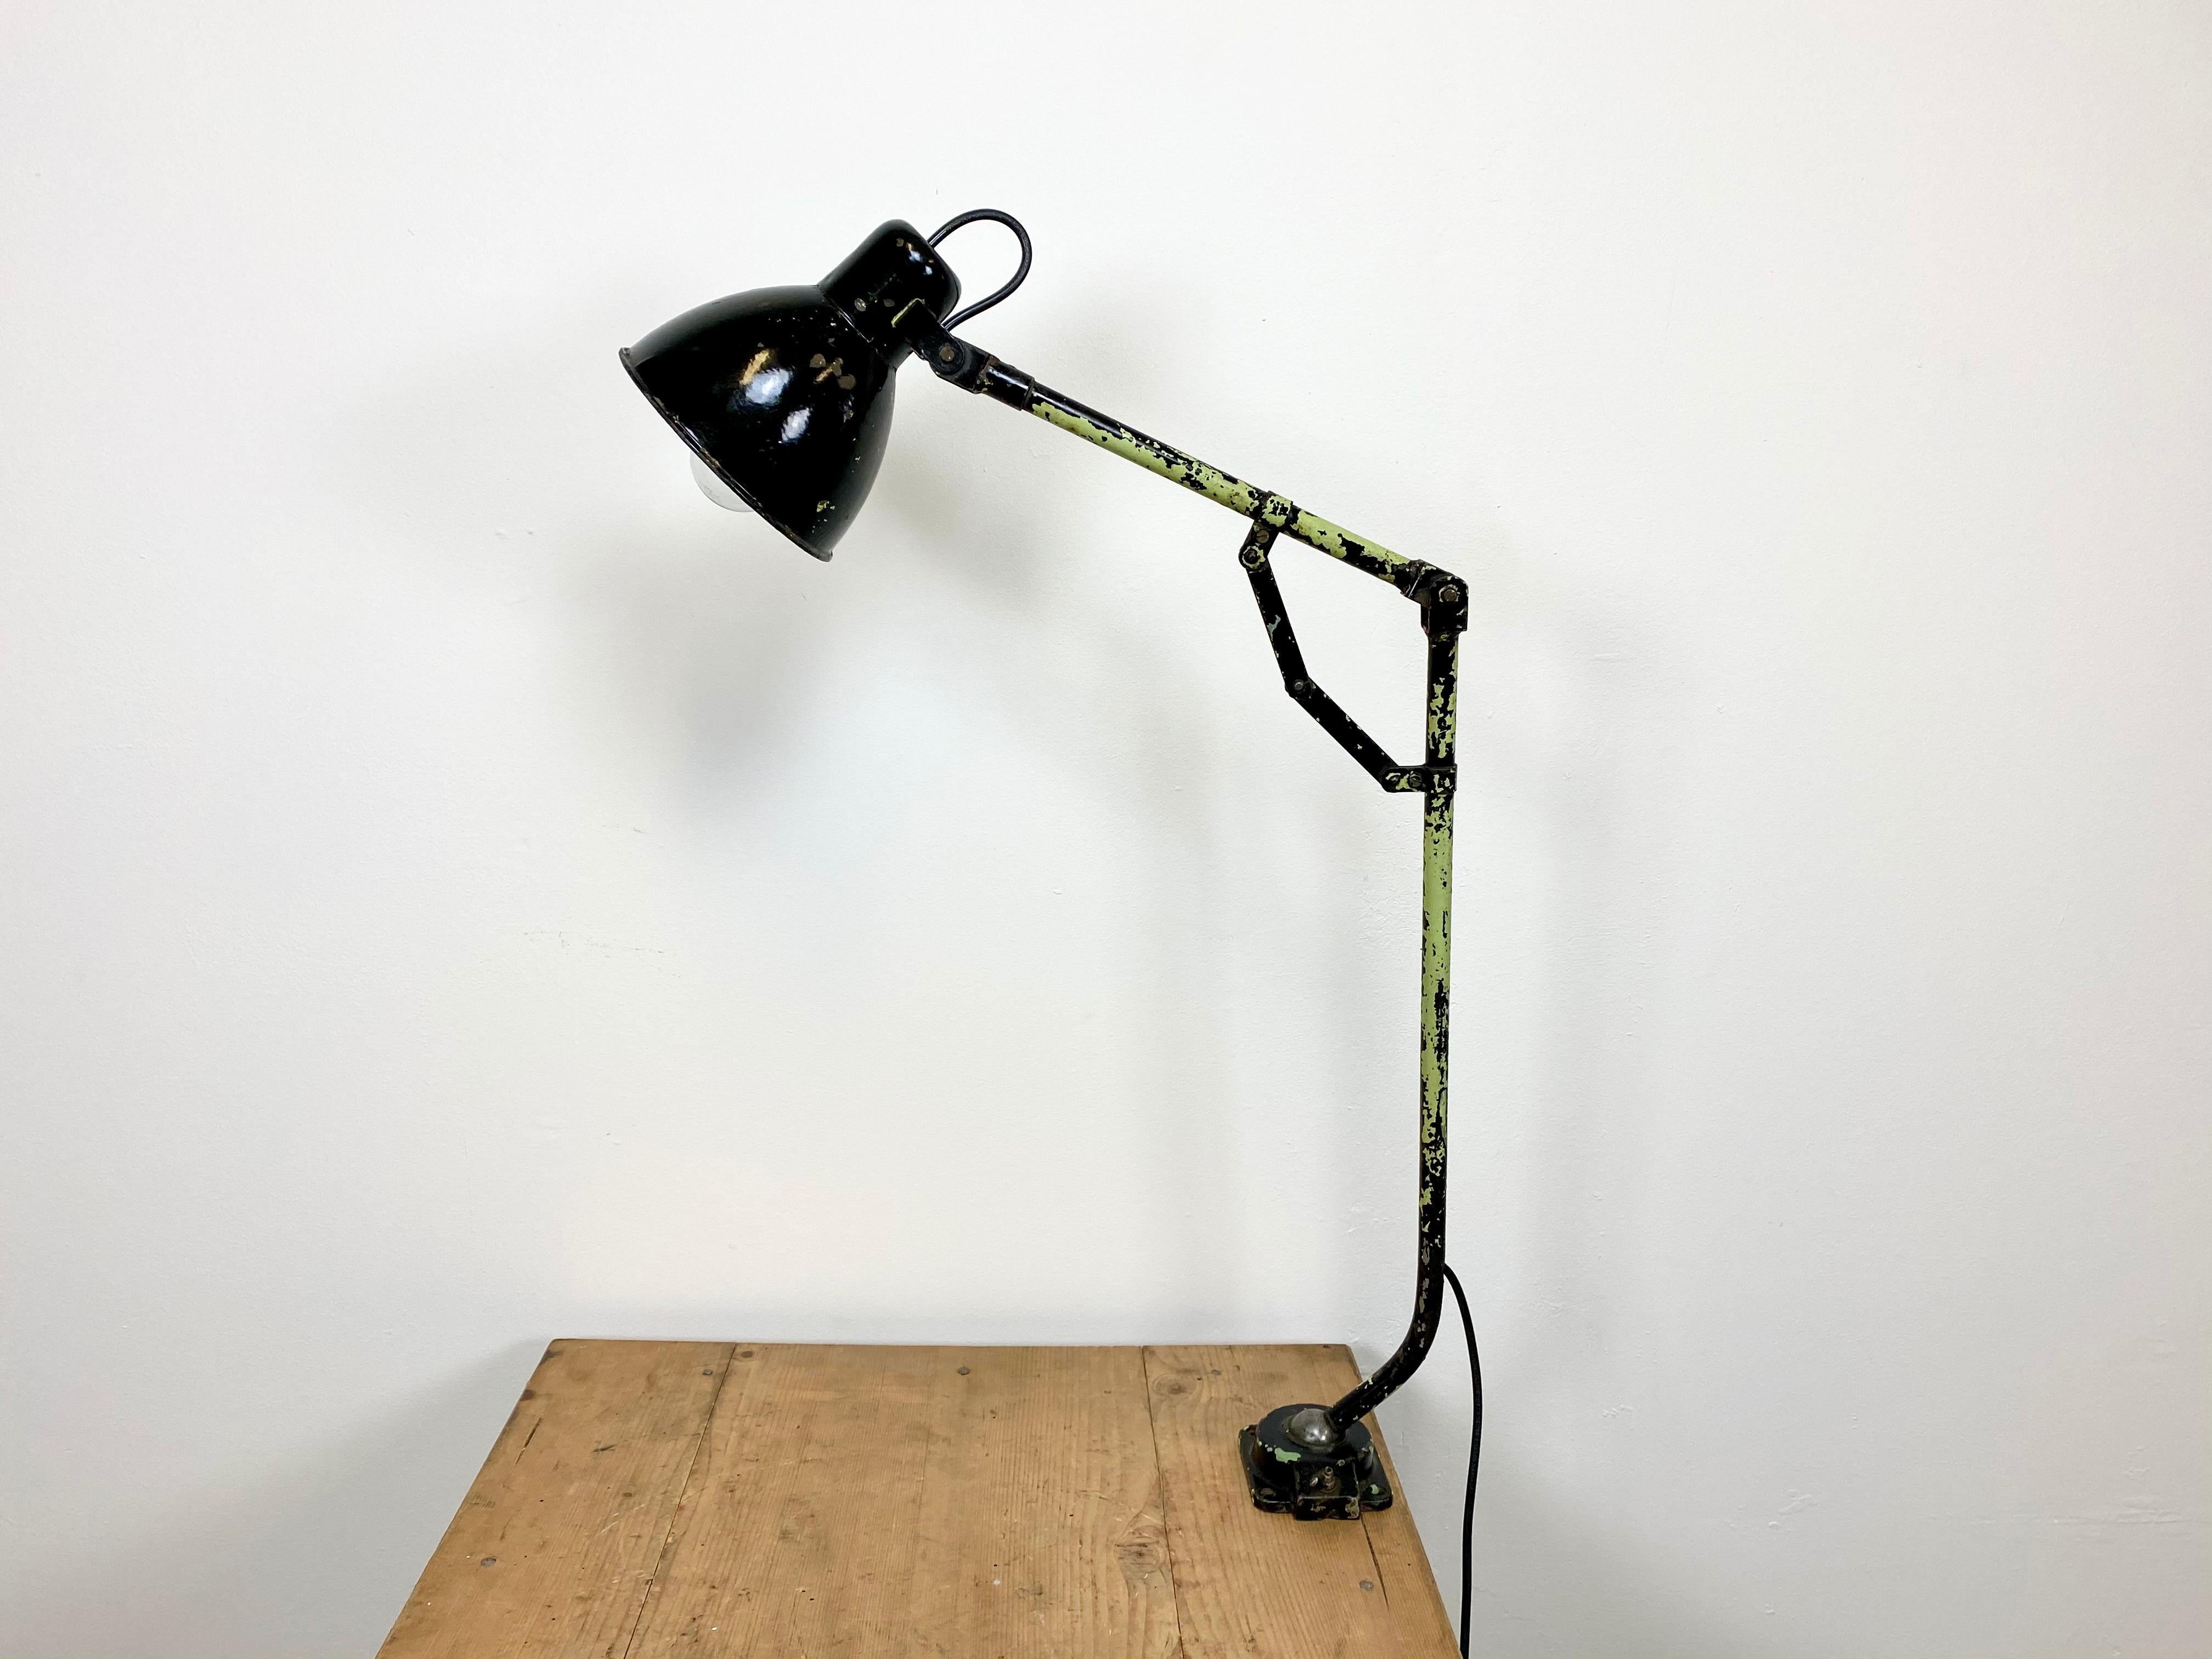 Industrial workshop desk lamp from 1950s. It features a black enamel shade with white interior, an iron base and arm with three adjustable joints. The porcelain socket requires E27 lightbulbs. The diameter of the shade is 16 cm.